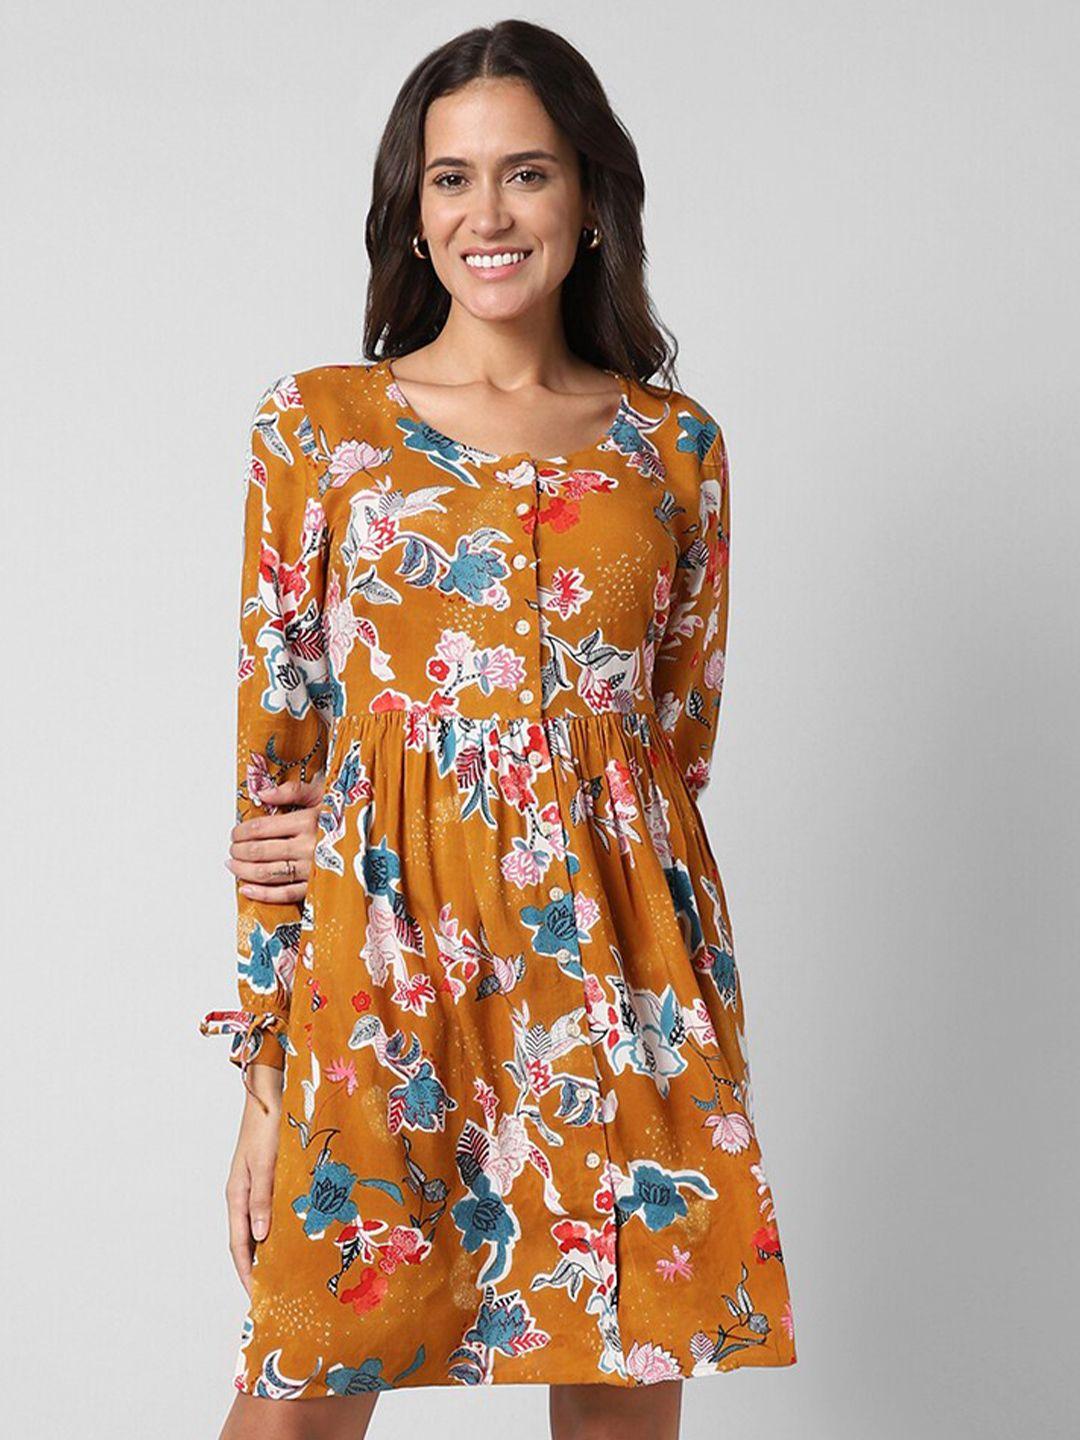 pantaloons floral printed cuffed sleeves gathered detail fit & flare dress